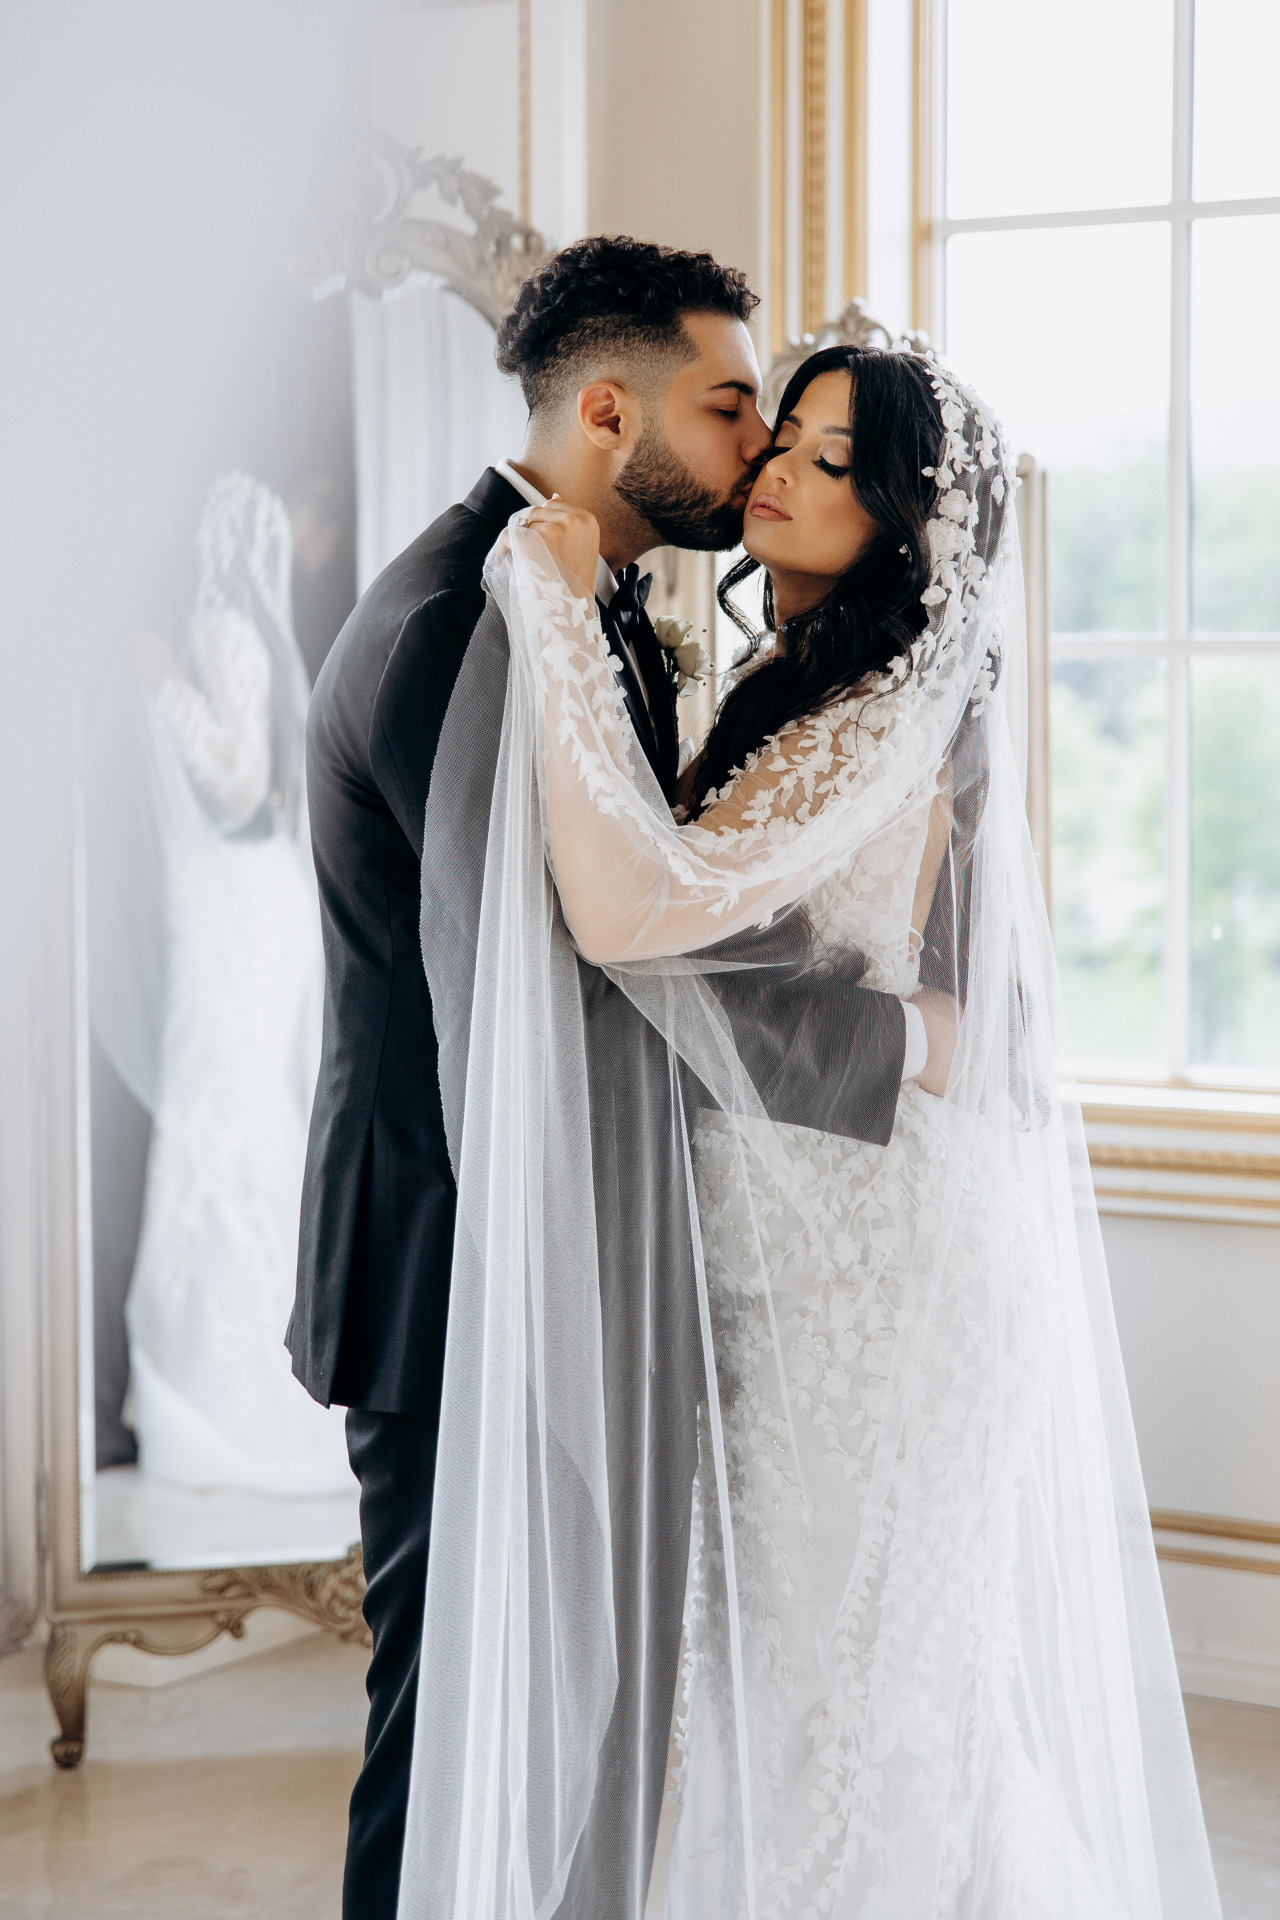 Egyprian coptic wedding editorial style in New Jersey 69